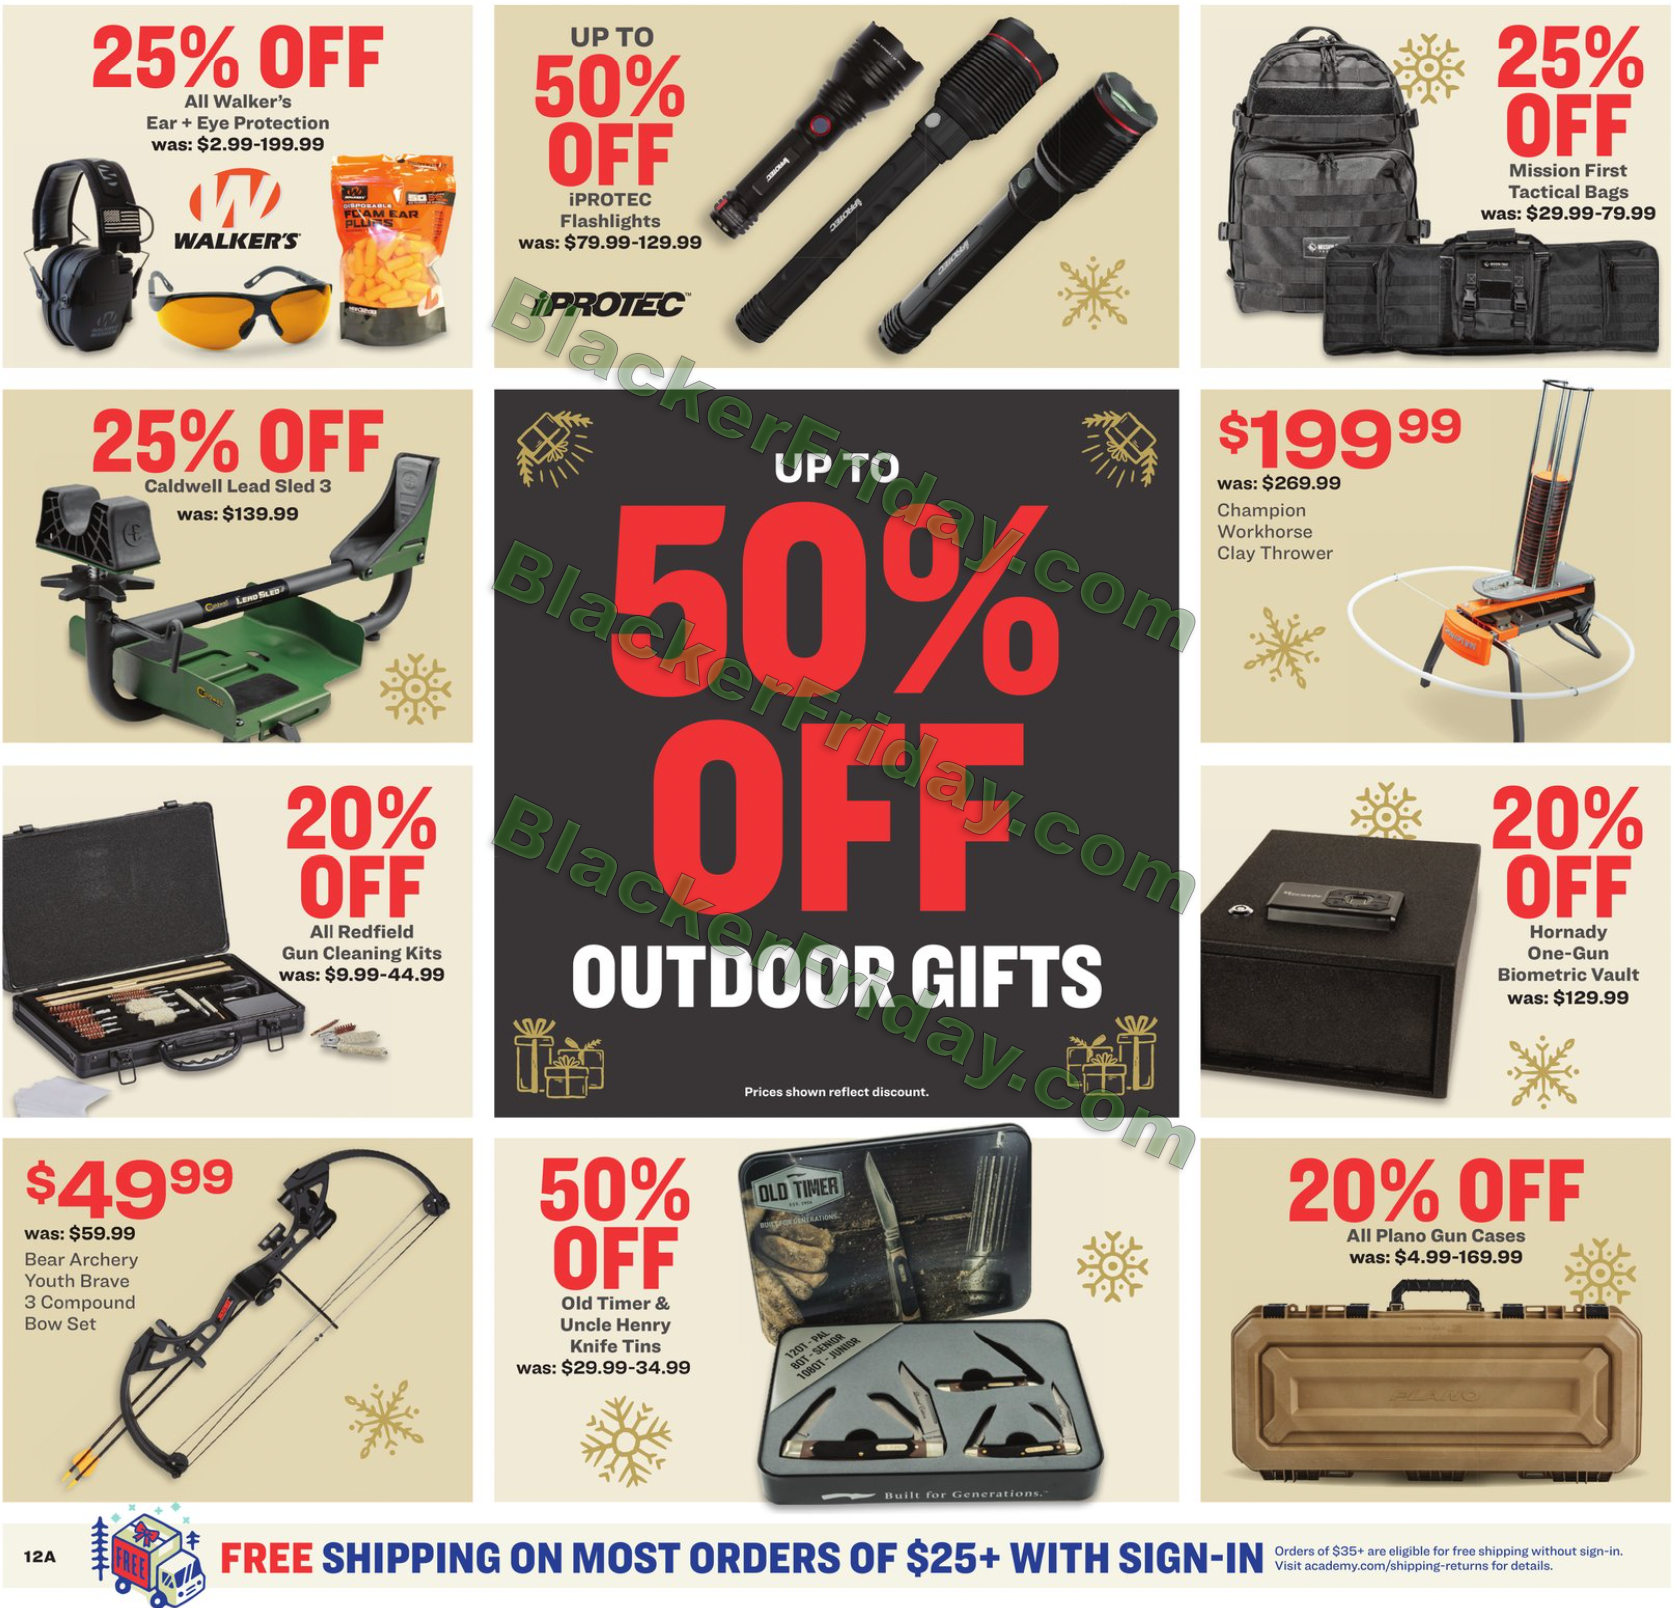 Academy Sports Outdoors Black Friday 2022 Sale - Heres Whats Coming - Blacker Friday